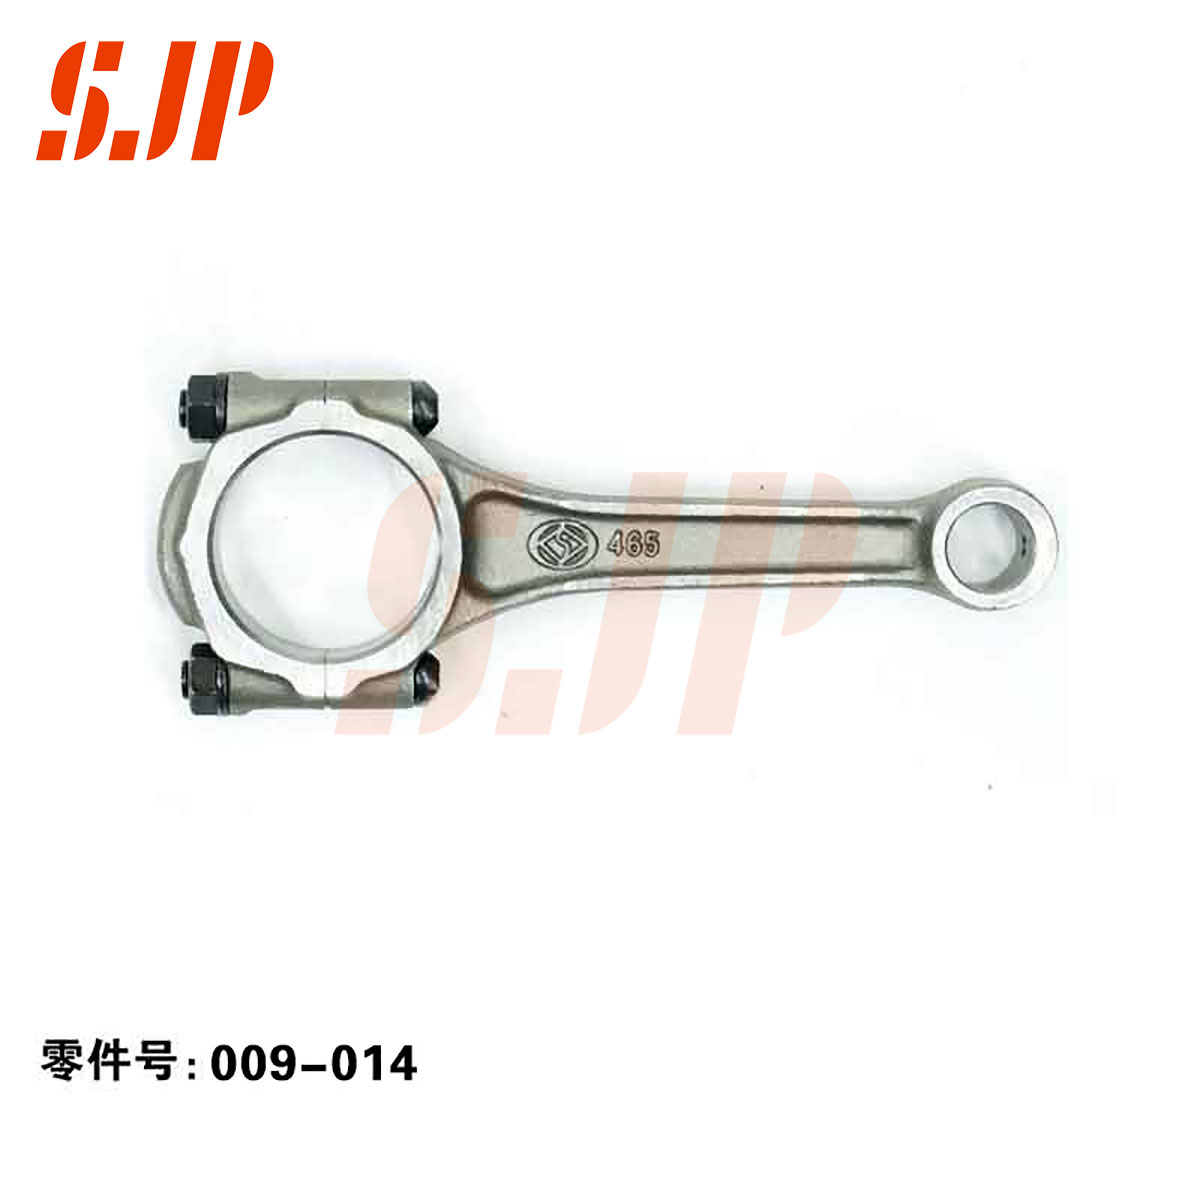 SJ-009-014 Connecting Rod For Changan Auto 465